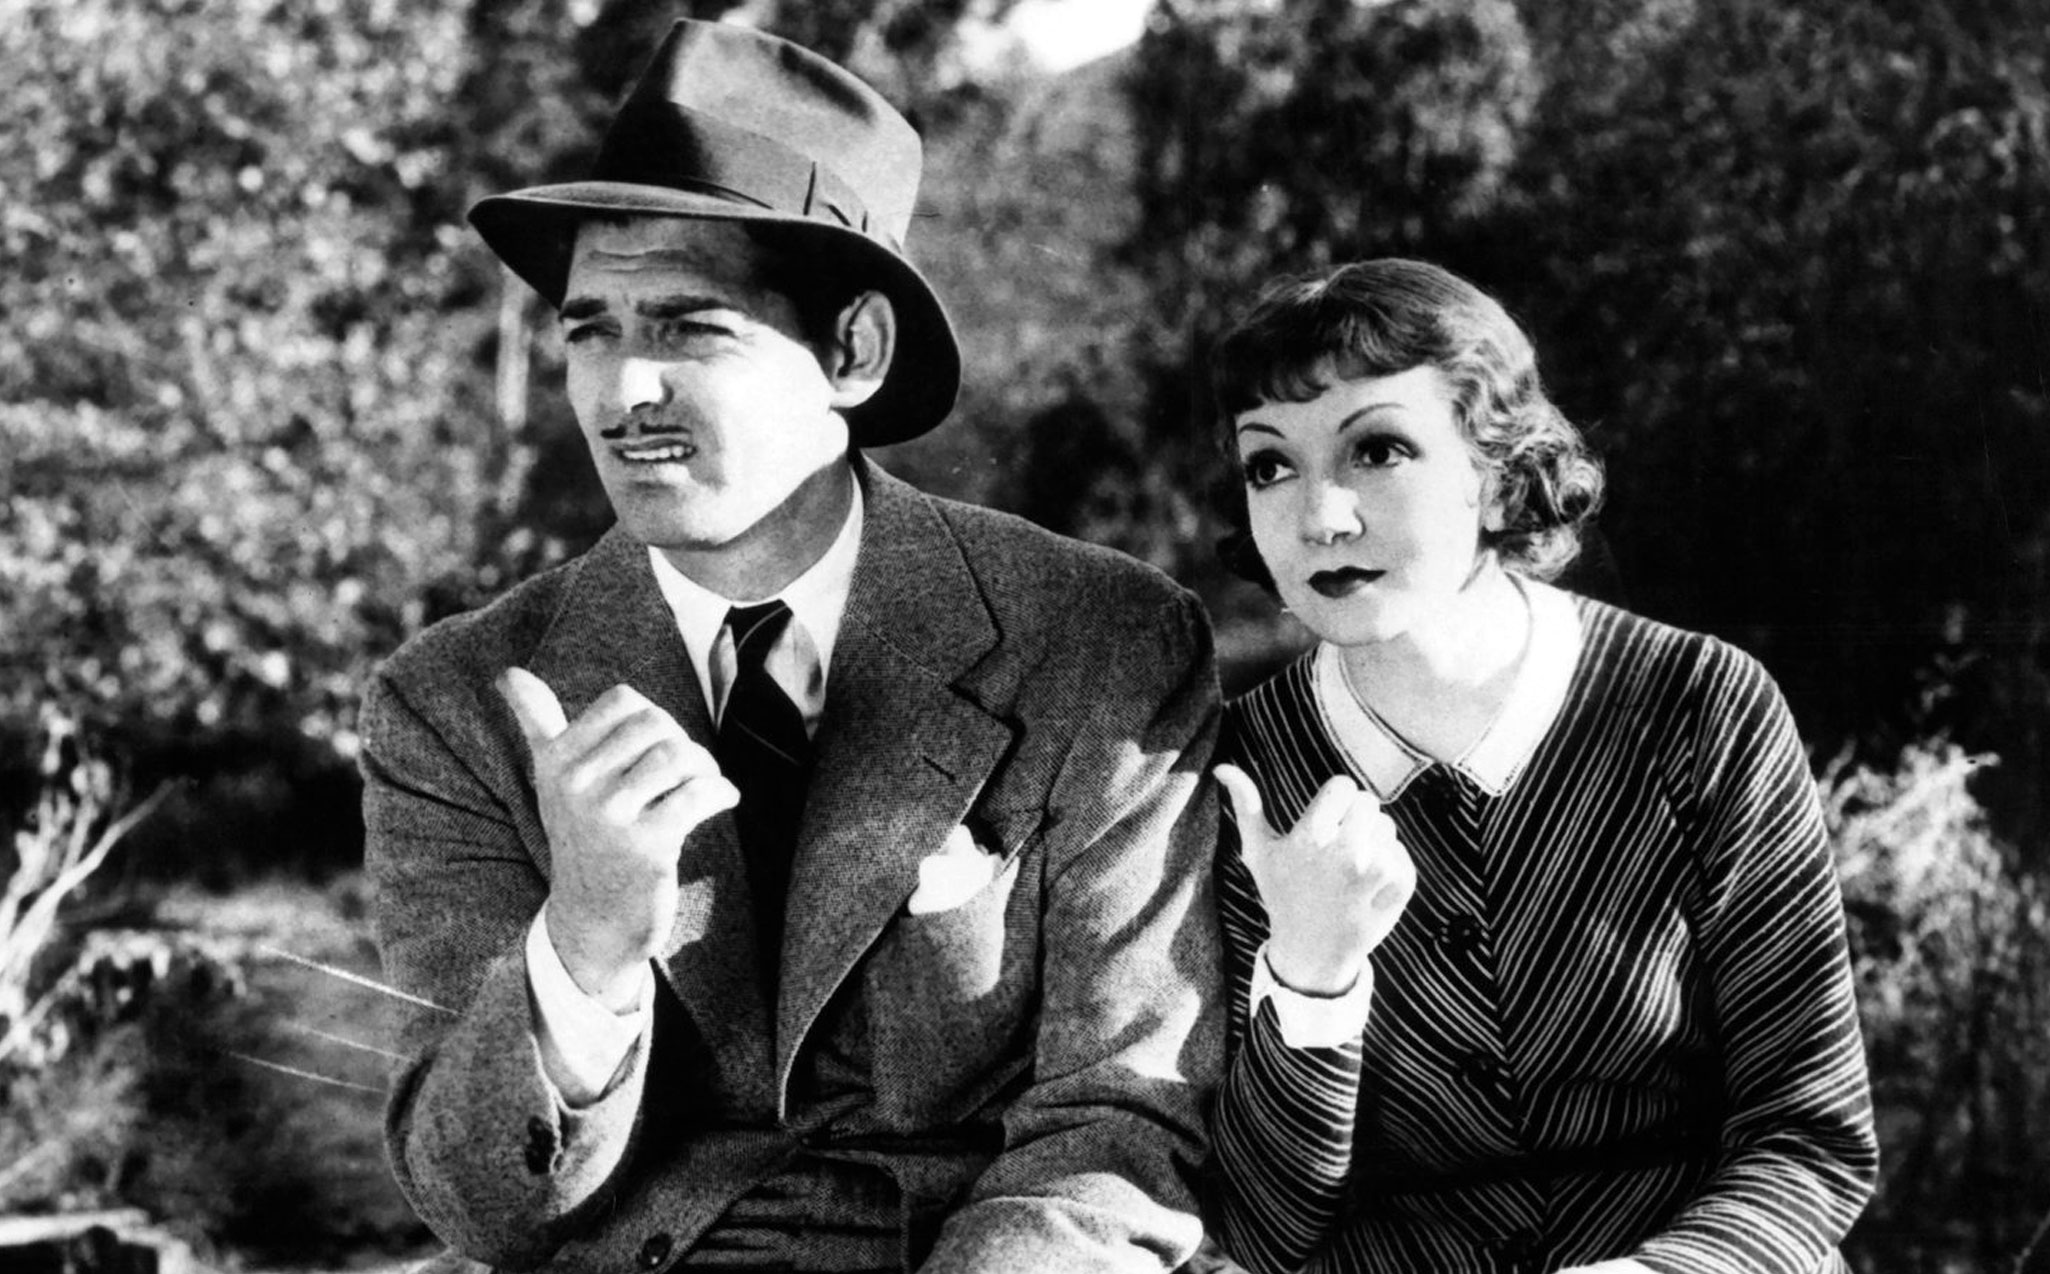 Featured image for “It Happened One Night”